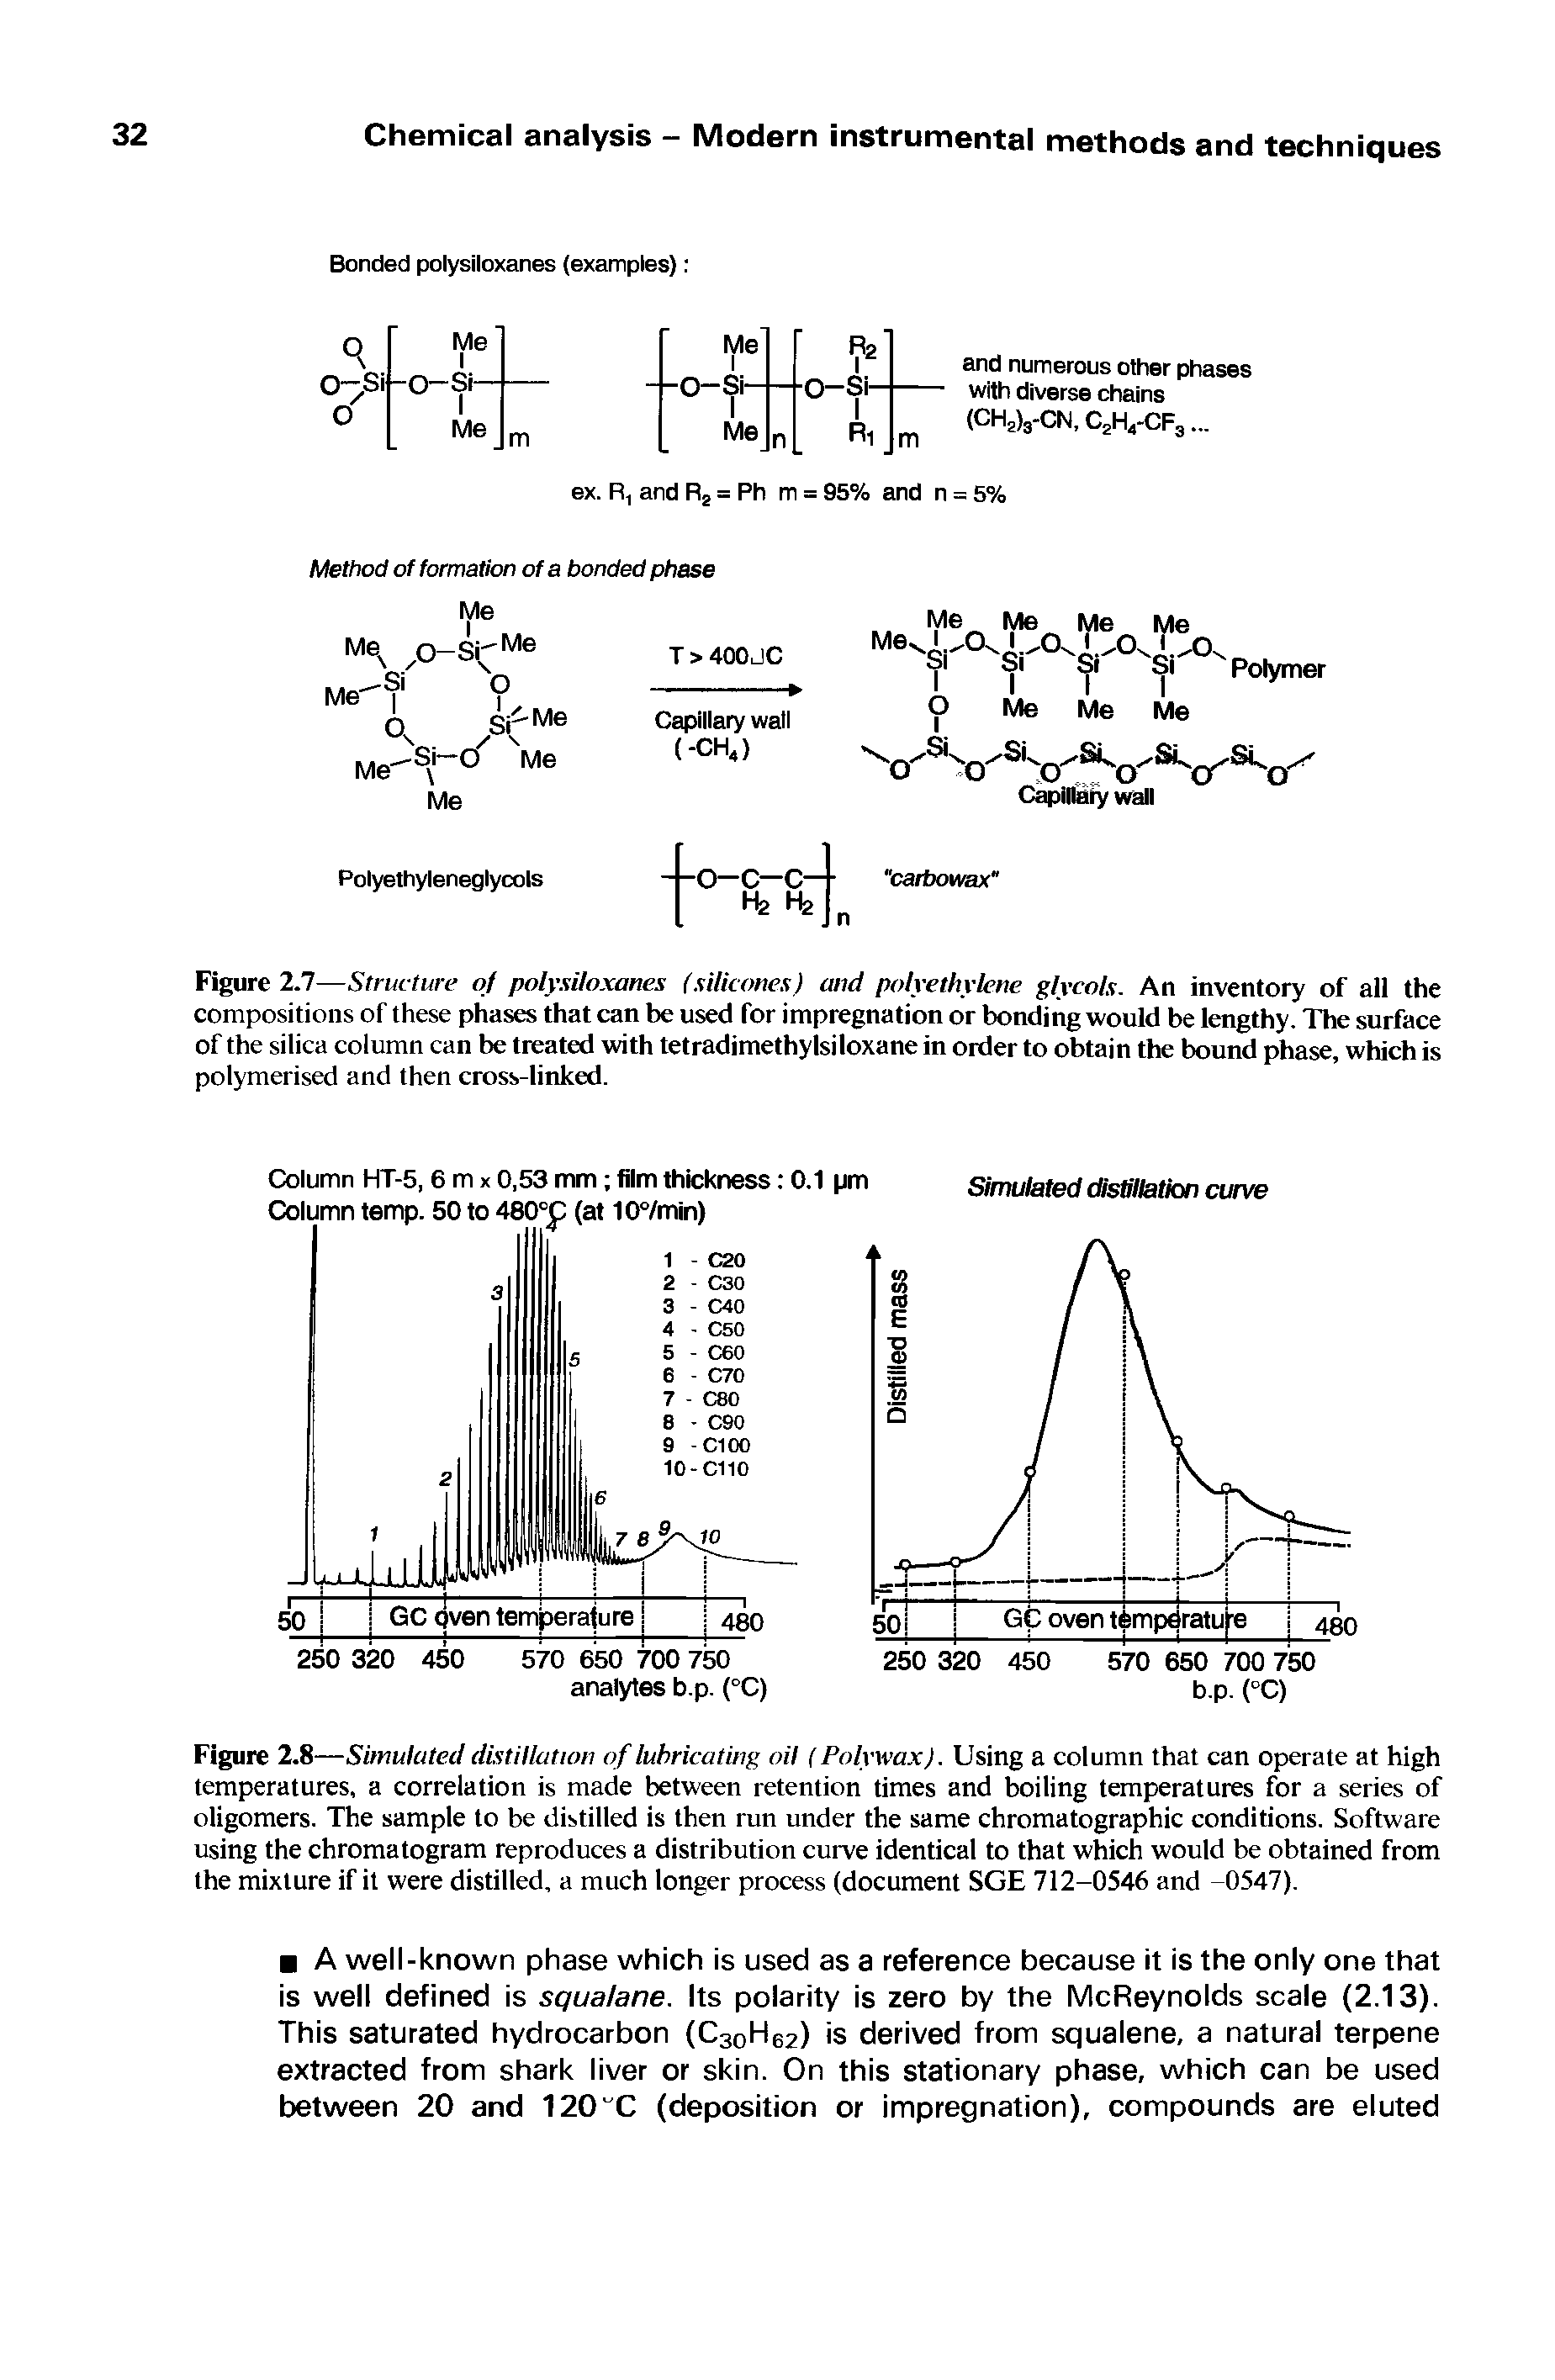 Figure 2.7—Structure of polysiloxanes (silicones) and polyethylene glycols. An inventory of all the compositions of these phases that can be used for impregnation or bonding would be lengthy. The surface of the silica column can be treated with tetradimethylsiloxane in order to obtain the bound phase, which is polymerised and then cross-linked.